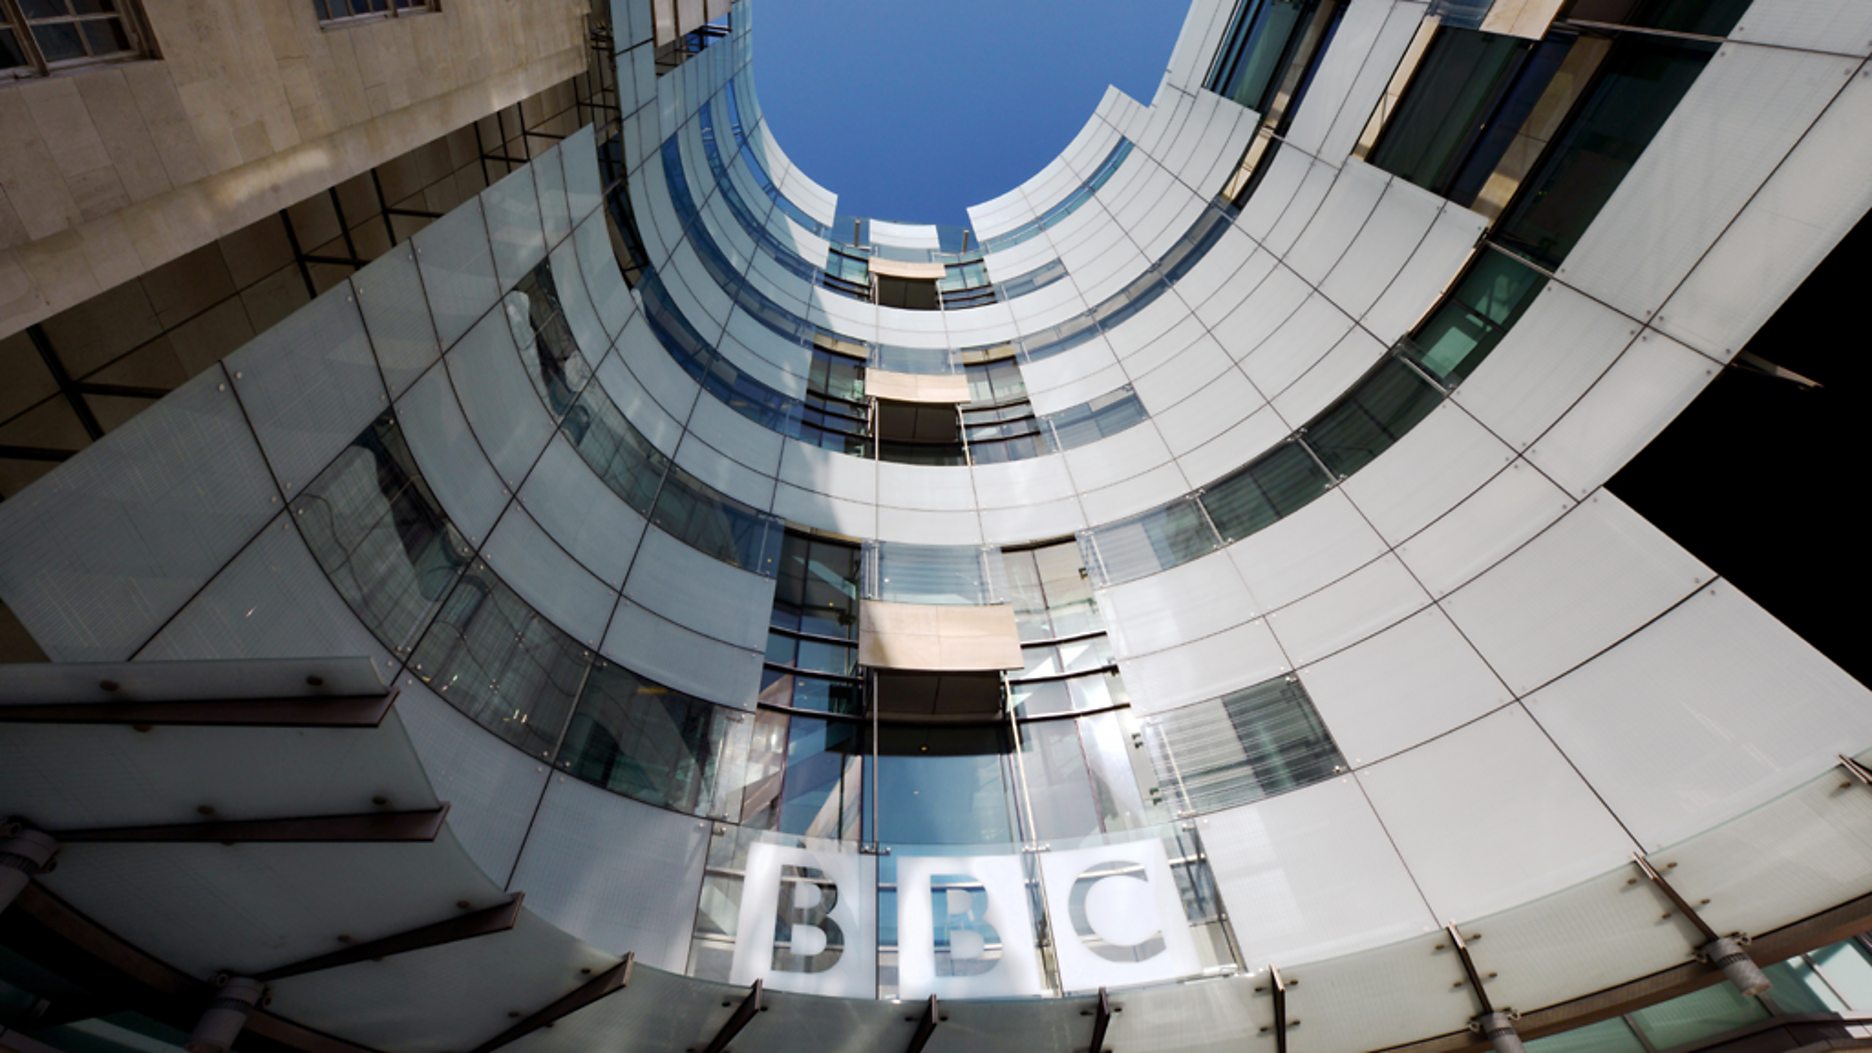 BBC reaches settlement with Michelle Hadaway